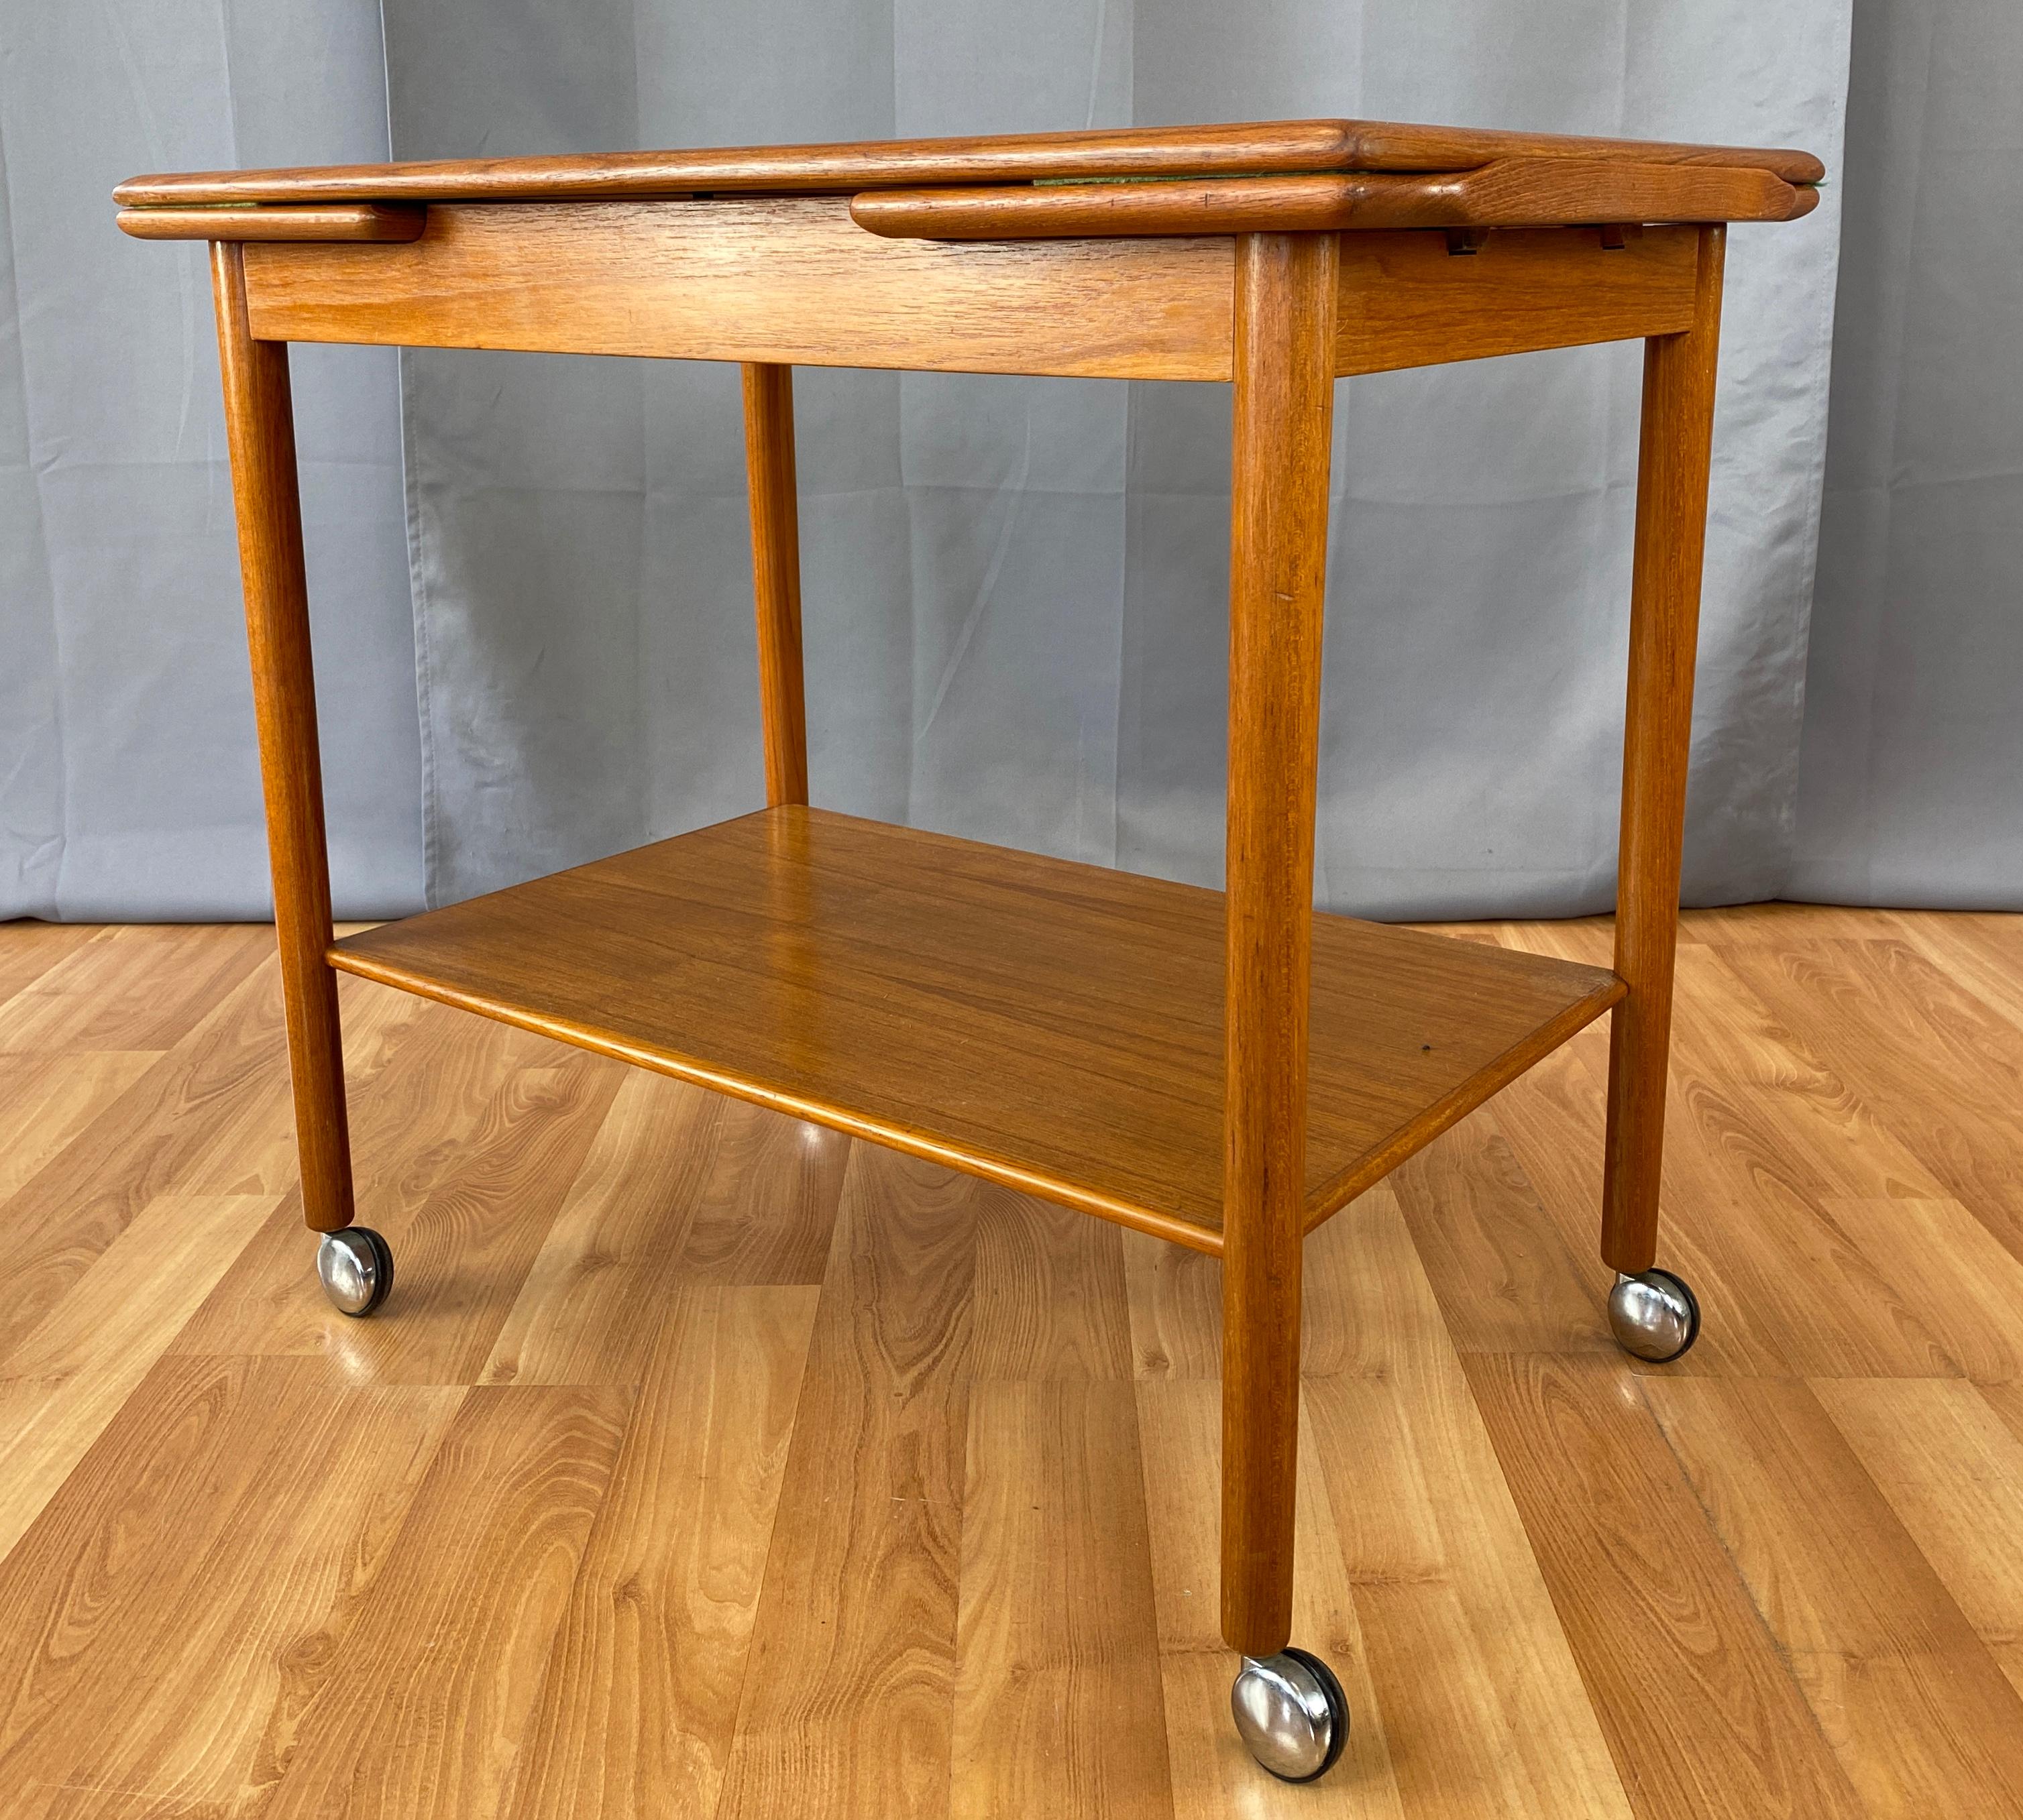 Offered here is a circa 1960s Teak bar and/or tea cart, by Dyrlund Denmark.
Four chrome casters, a large Teak bottom shelf, over this is the Teak top shelf which has two pull outs under it.
The pullouts, one side is Teak with the other has a black